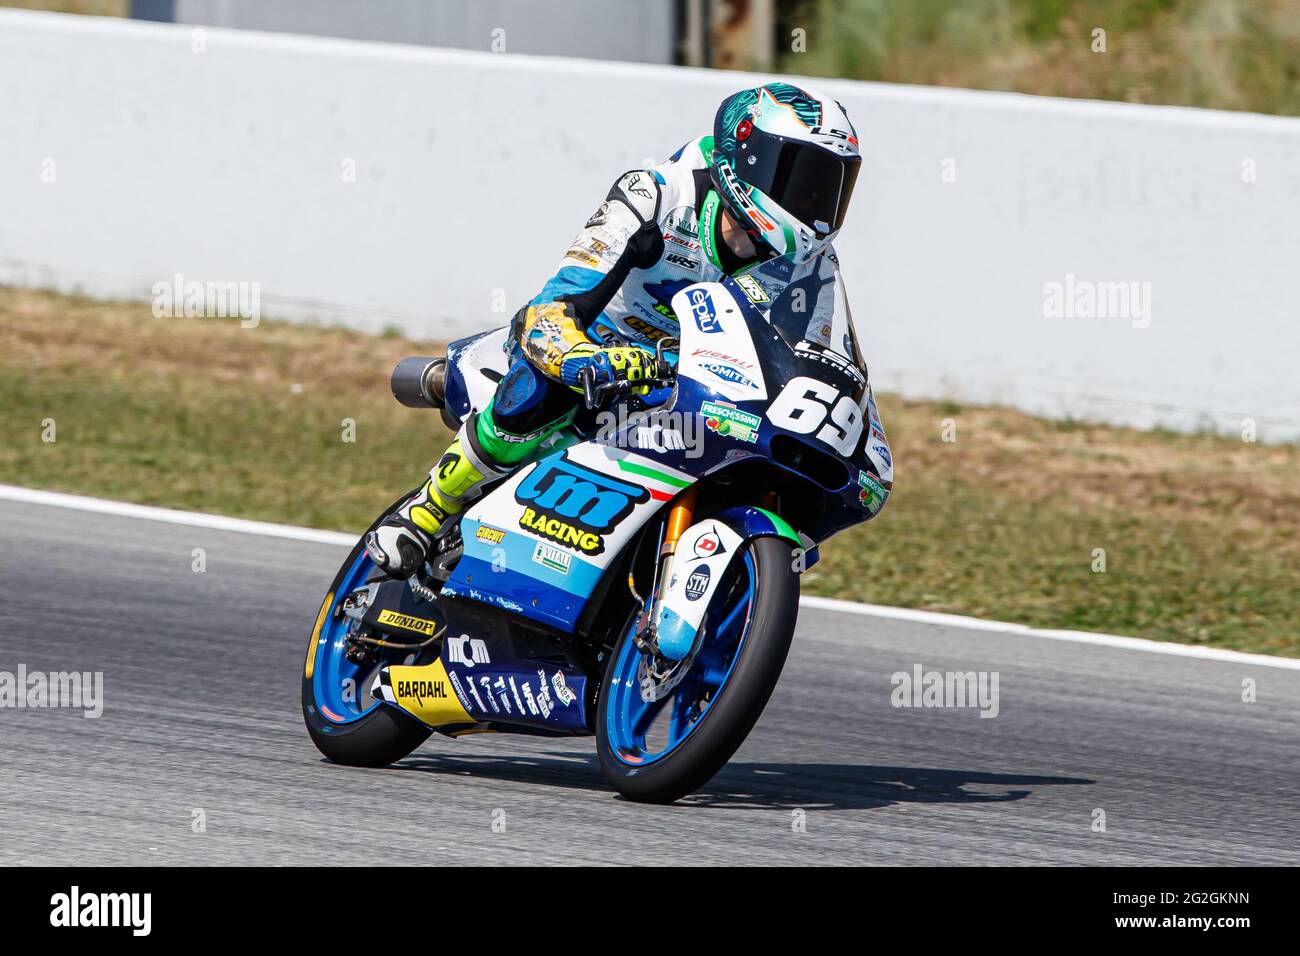 Montmelo, Barcelona, Spain. 11th June, 2021. Raffaele Fusco from Italia,  rider of Tm Racing Factory Team with Tm Racing during the Official Testing Session  Moto 3 of FIM CEV Repsol Barcelona in